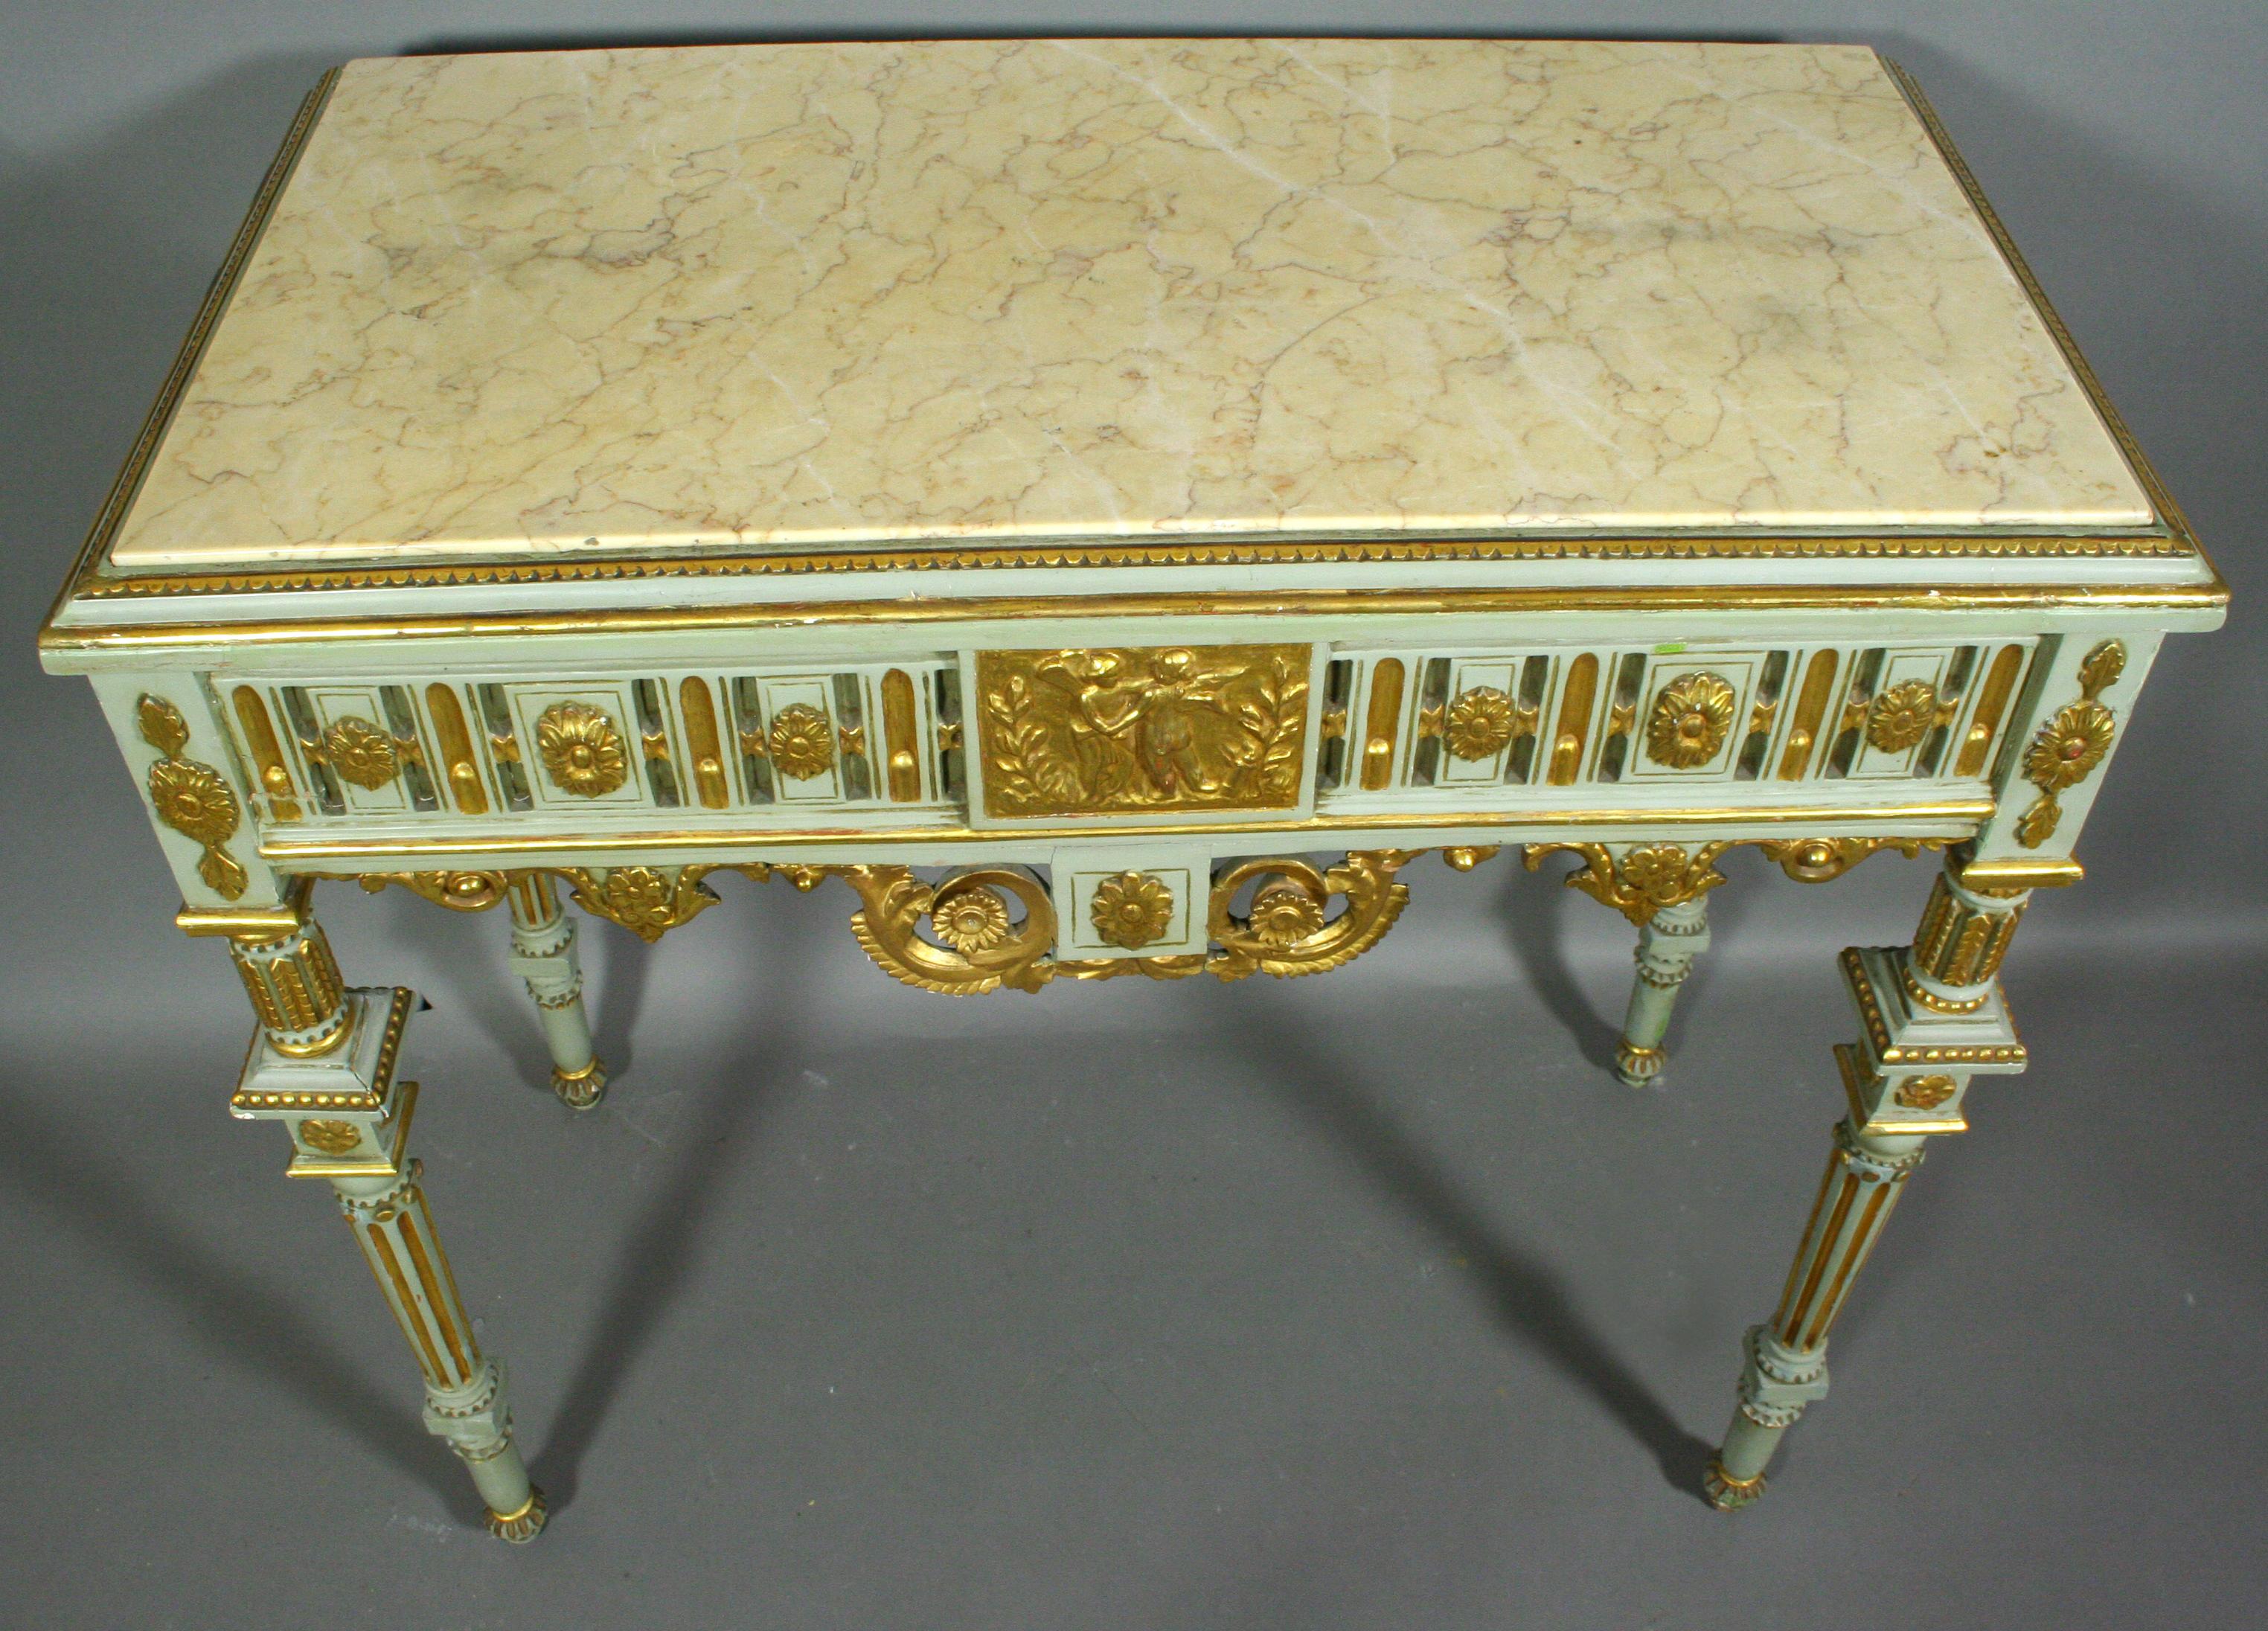 19th century gilt and green painted carved console table with gilt putti decoration, rosette, and scroll design.